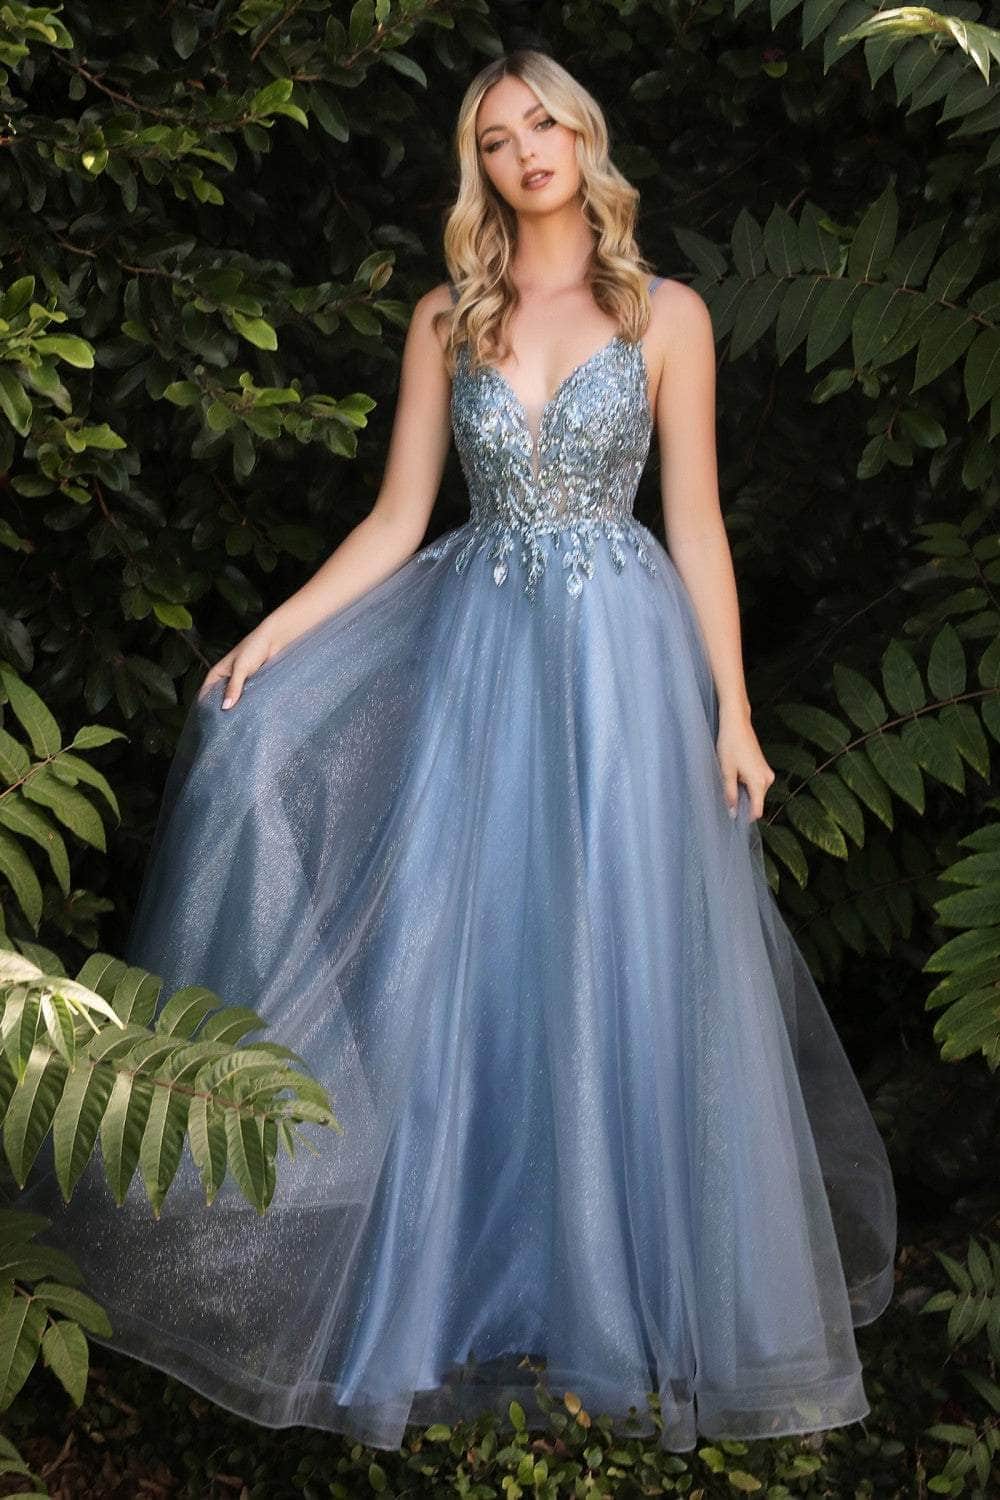 Ladivine CD0154 - Plunging Beaded A-Line Junior Prom Gown
